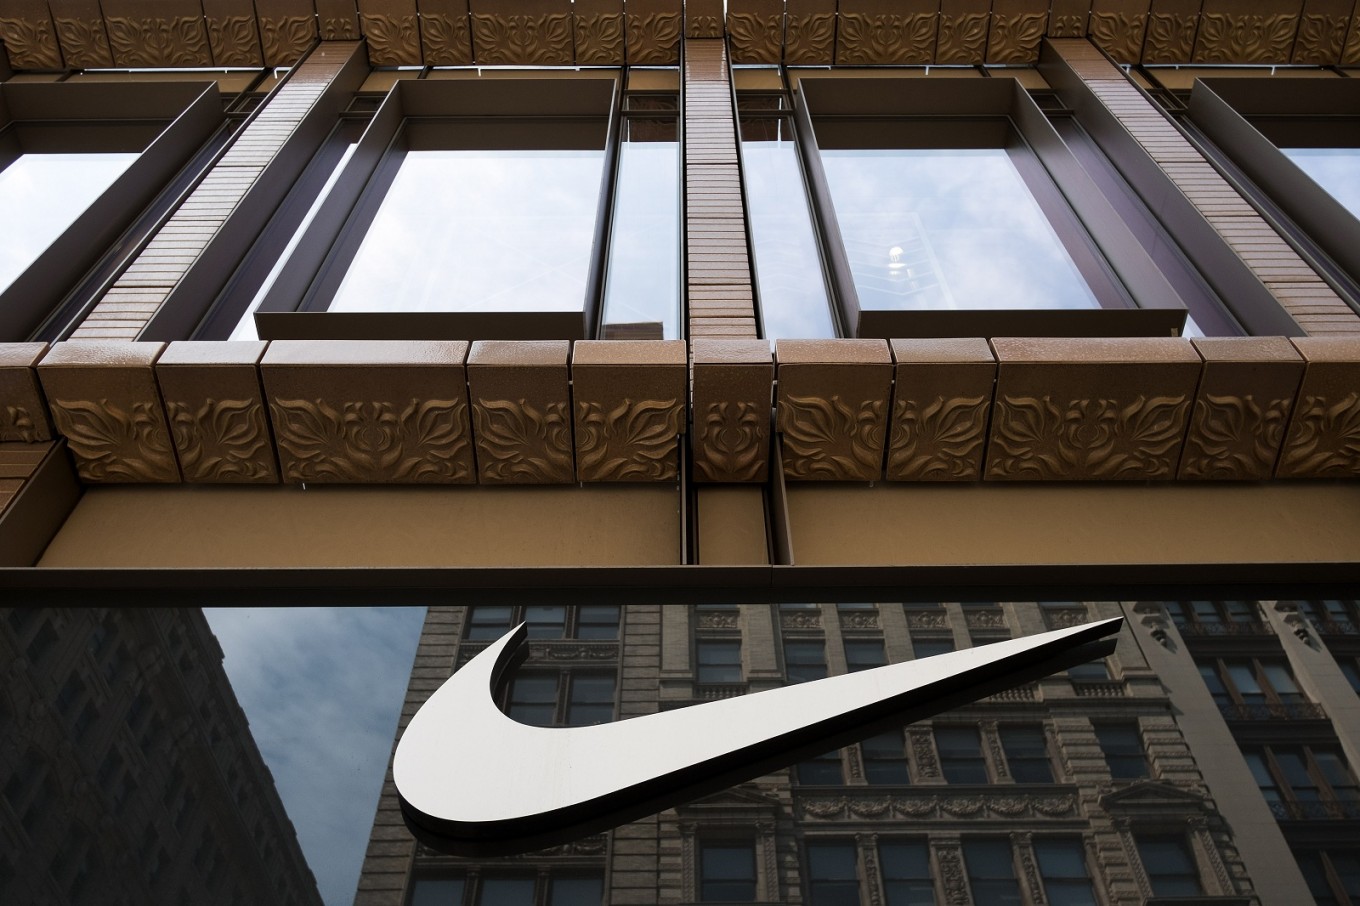 Muslims demand Nike recall sneakers with design that resembles Arabic word for 'Allah’